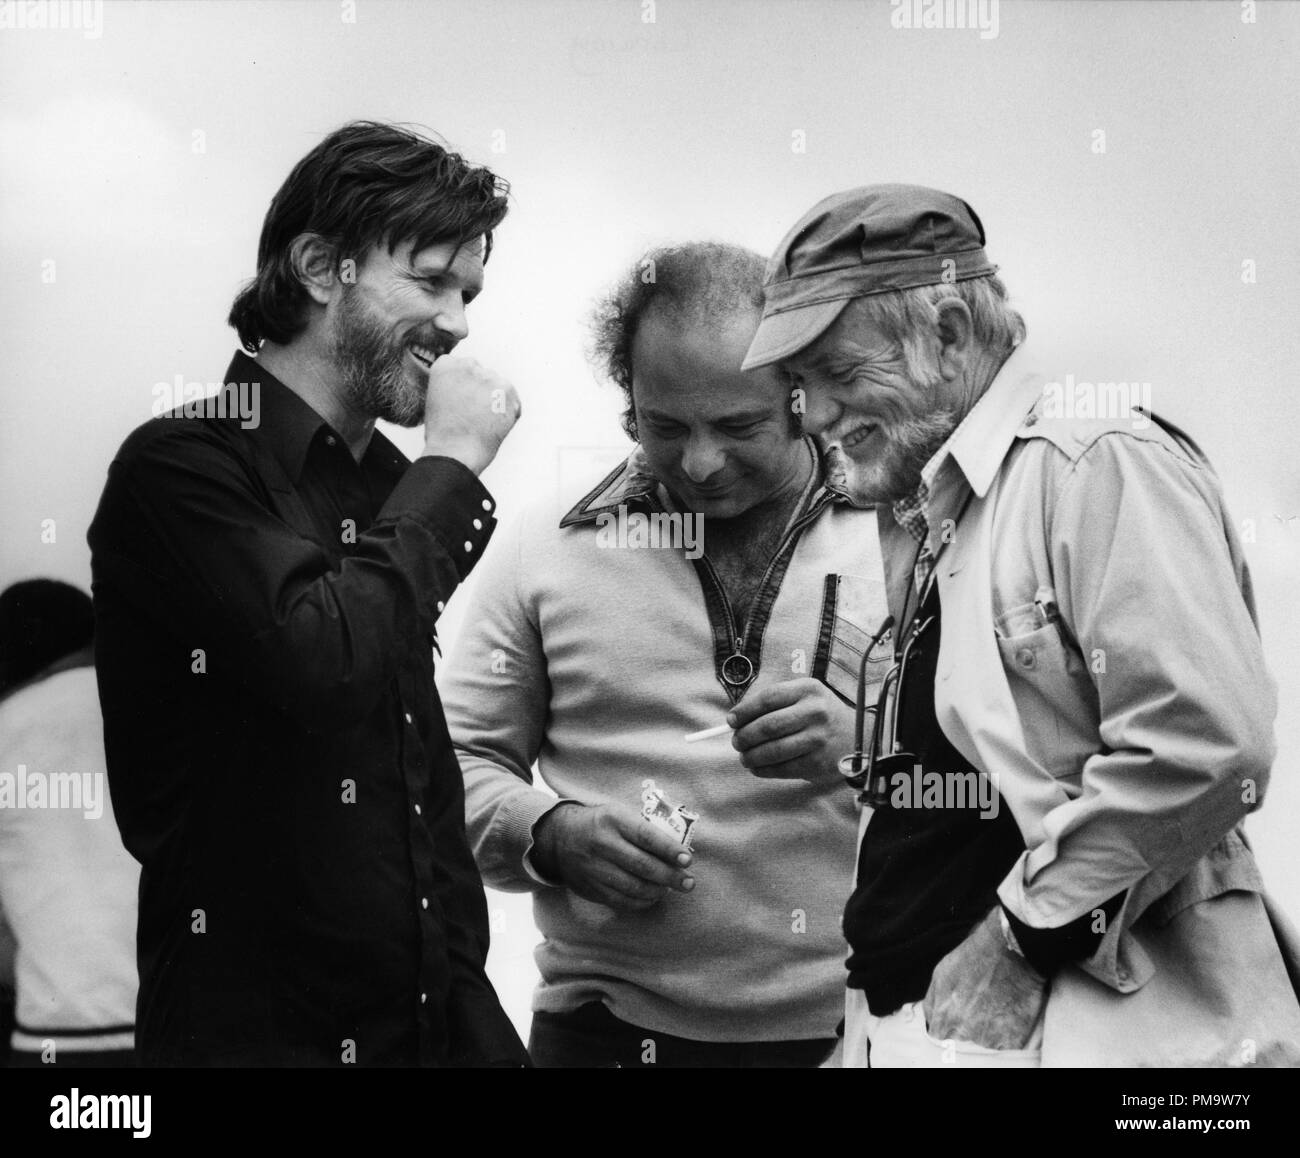 Studio Publicity Still from 'Convoy' Kris Kristofferson, Burt Young, Director Sam Peckinpah © 1978 United Artists    All Rights Reserved   File Reference # 31720195THA  For Editorial Use Only Stock Photo